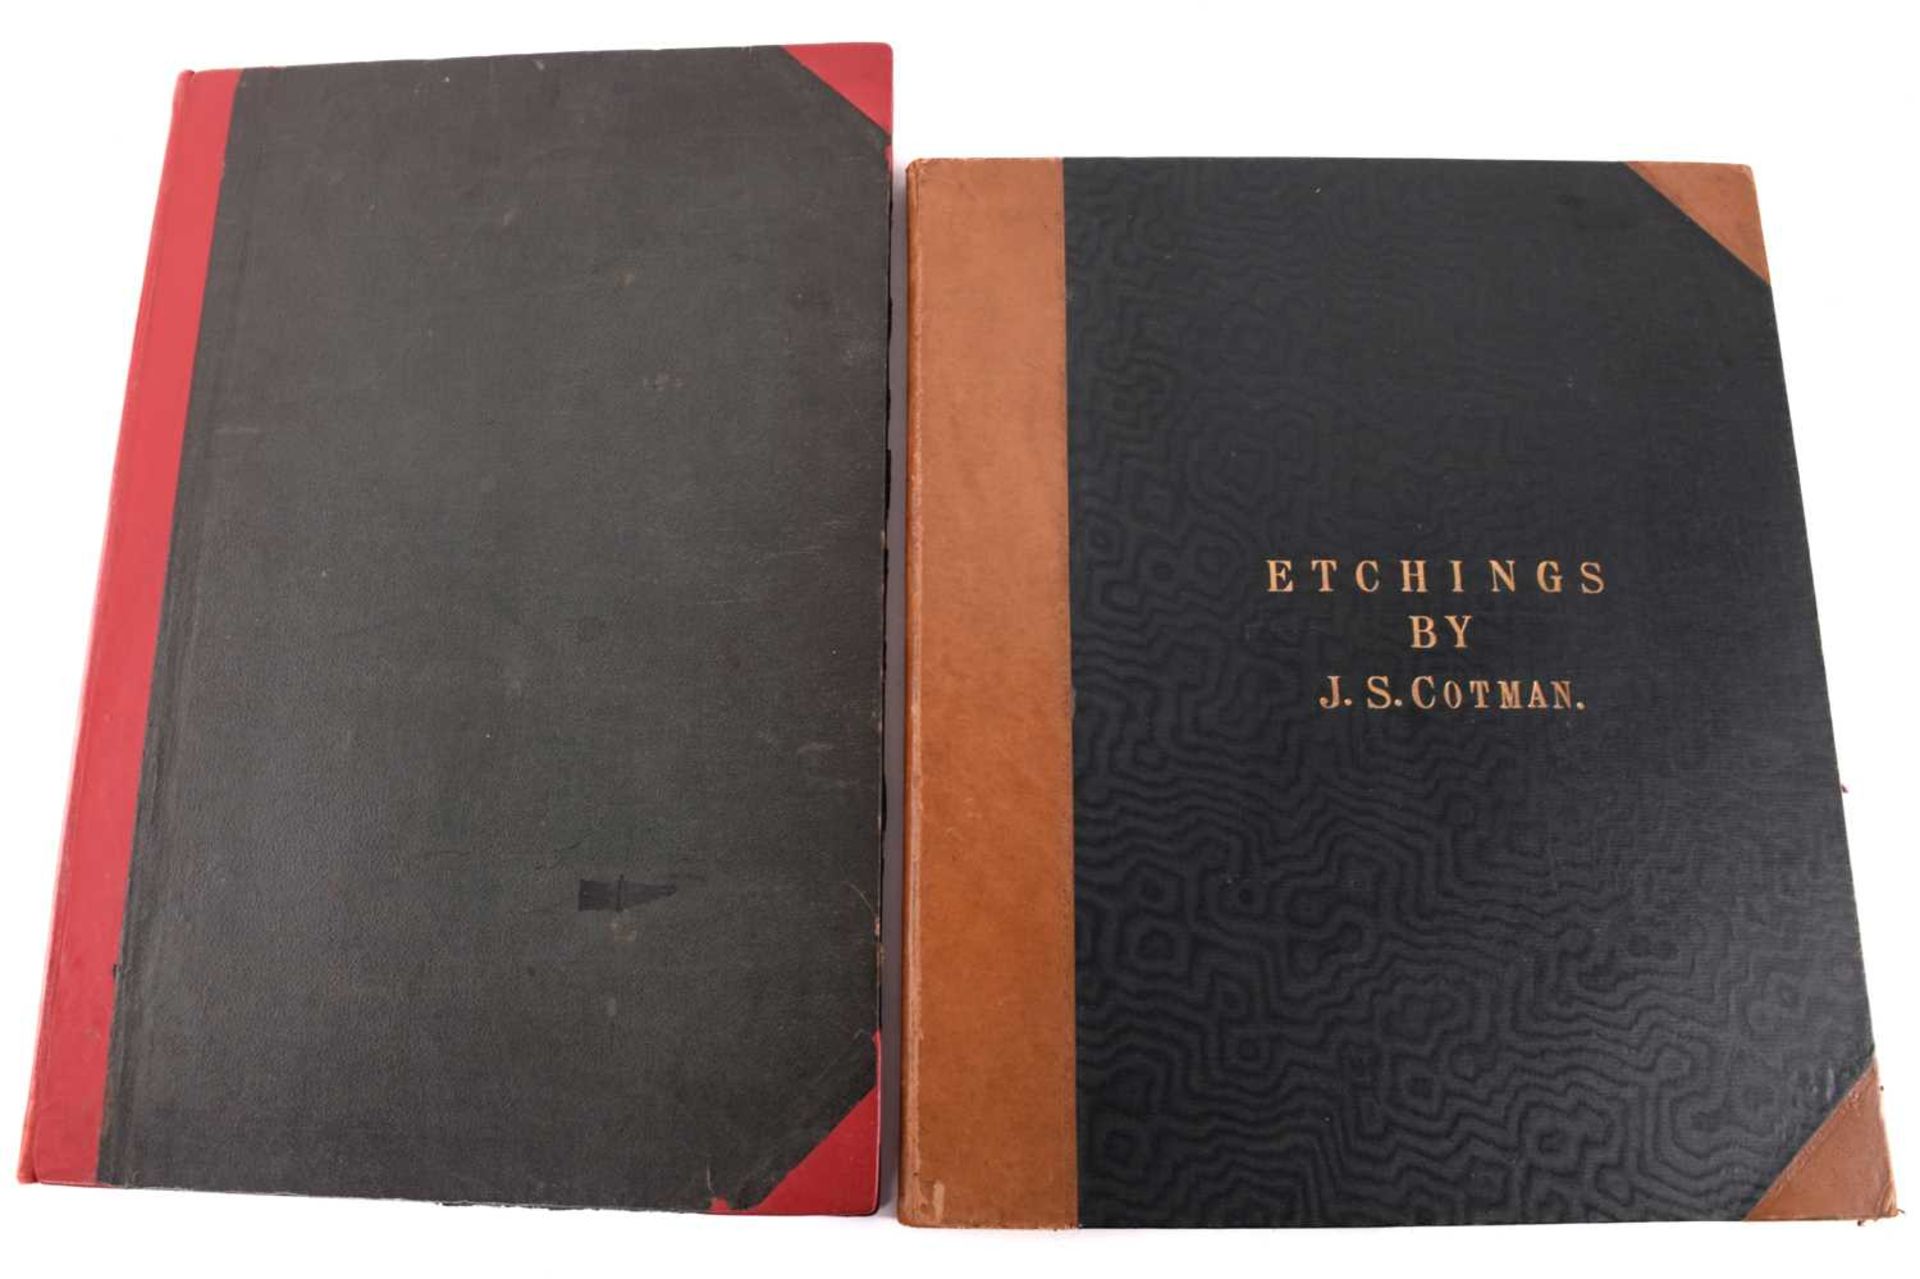 John Sell Cotman Etchings, 1811 edition with descriptive index, later half calf bound & 'Cotman's